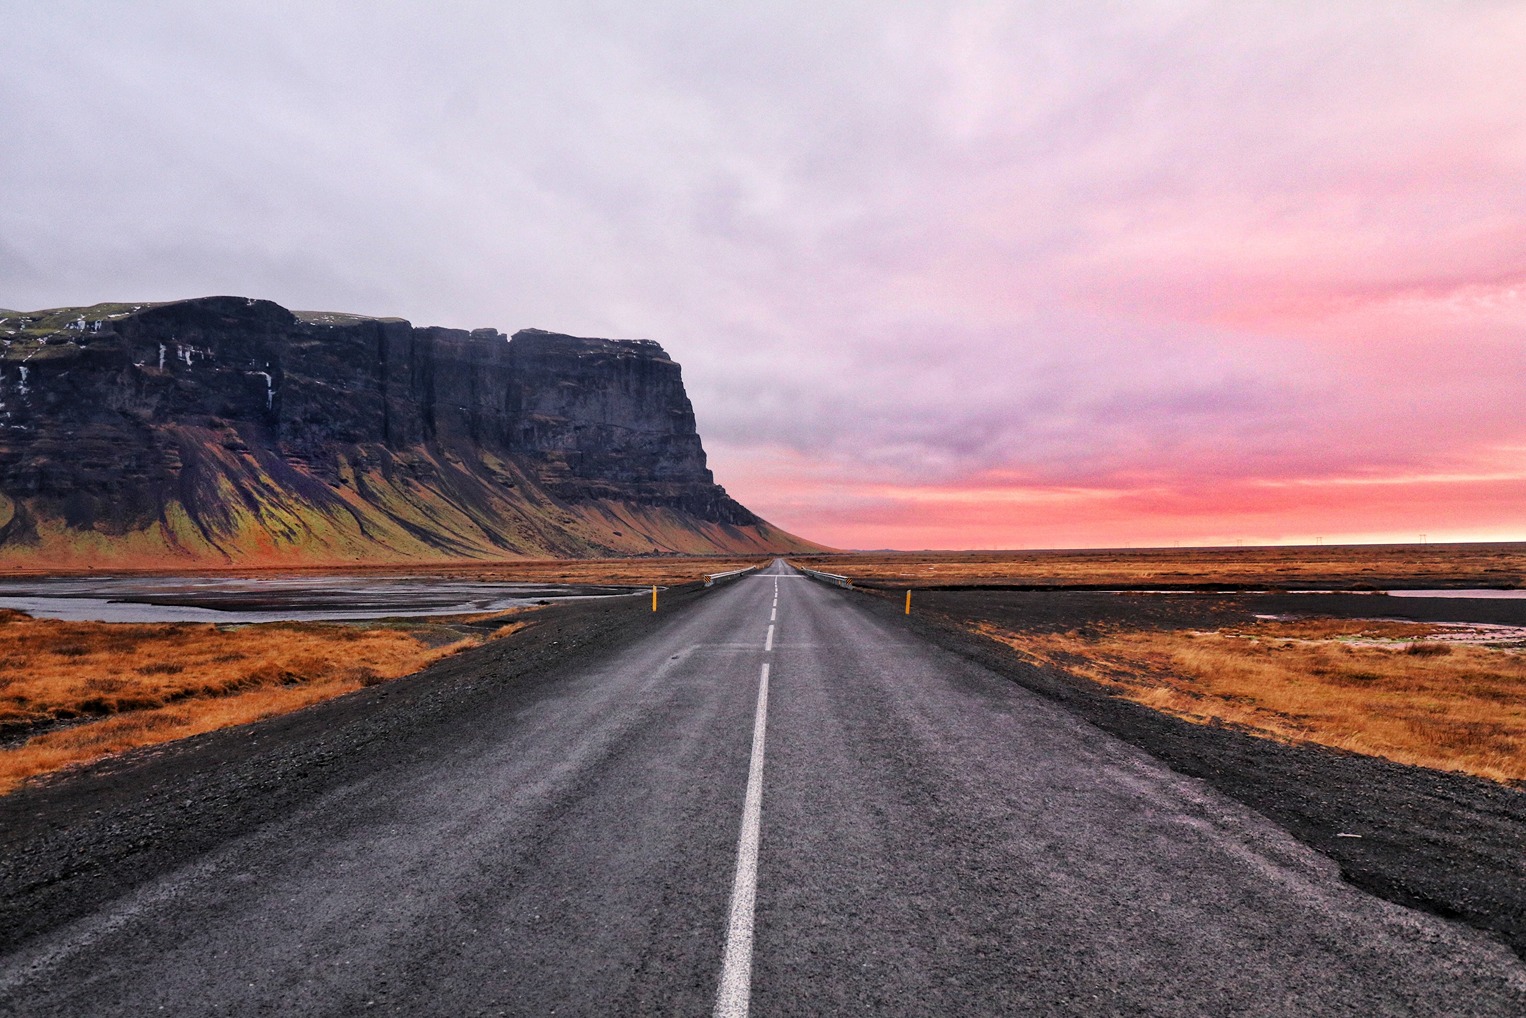 A long stretch of dark grey road surrounded by an orange landscape and cliffs with a pink cloudy sky during Womens Travel Network's Iceland tour for women